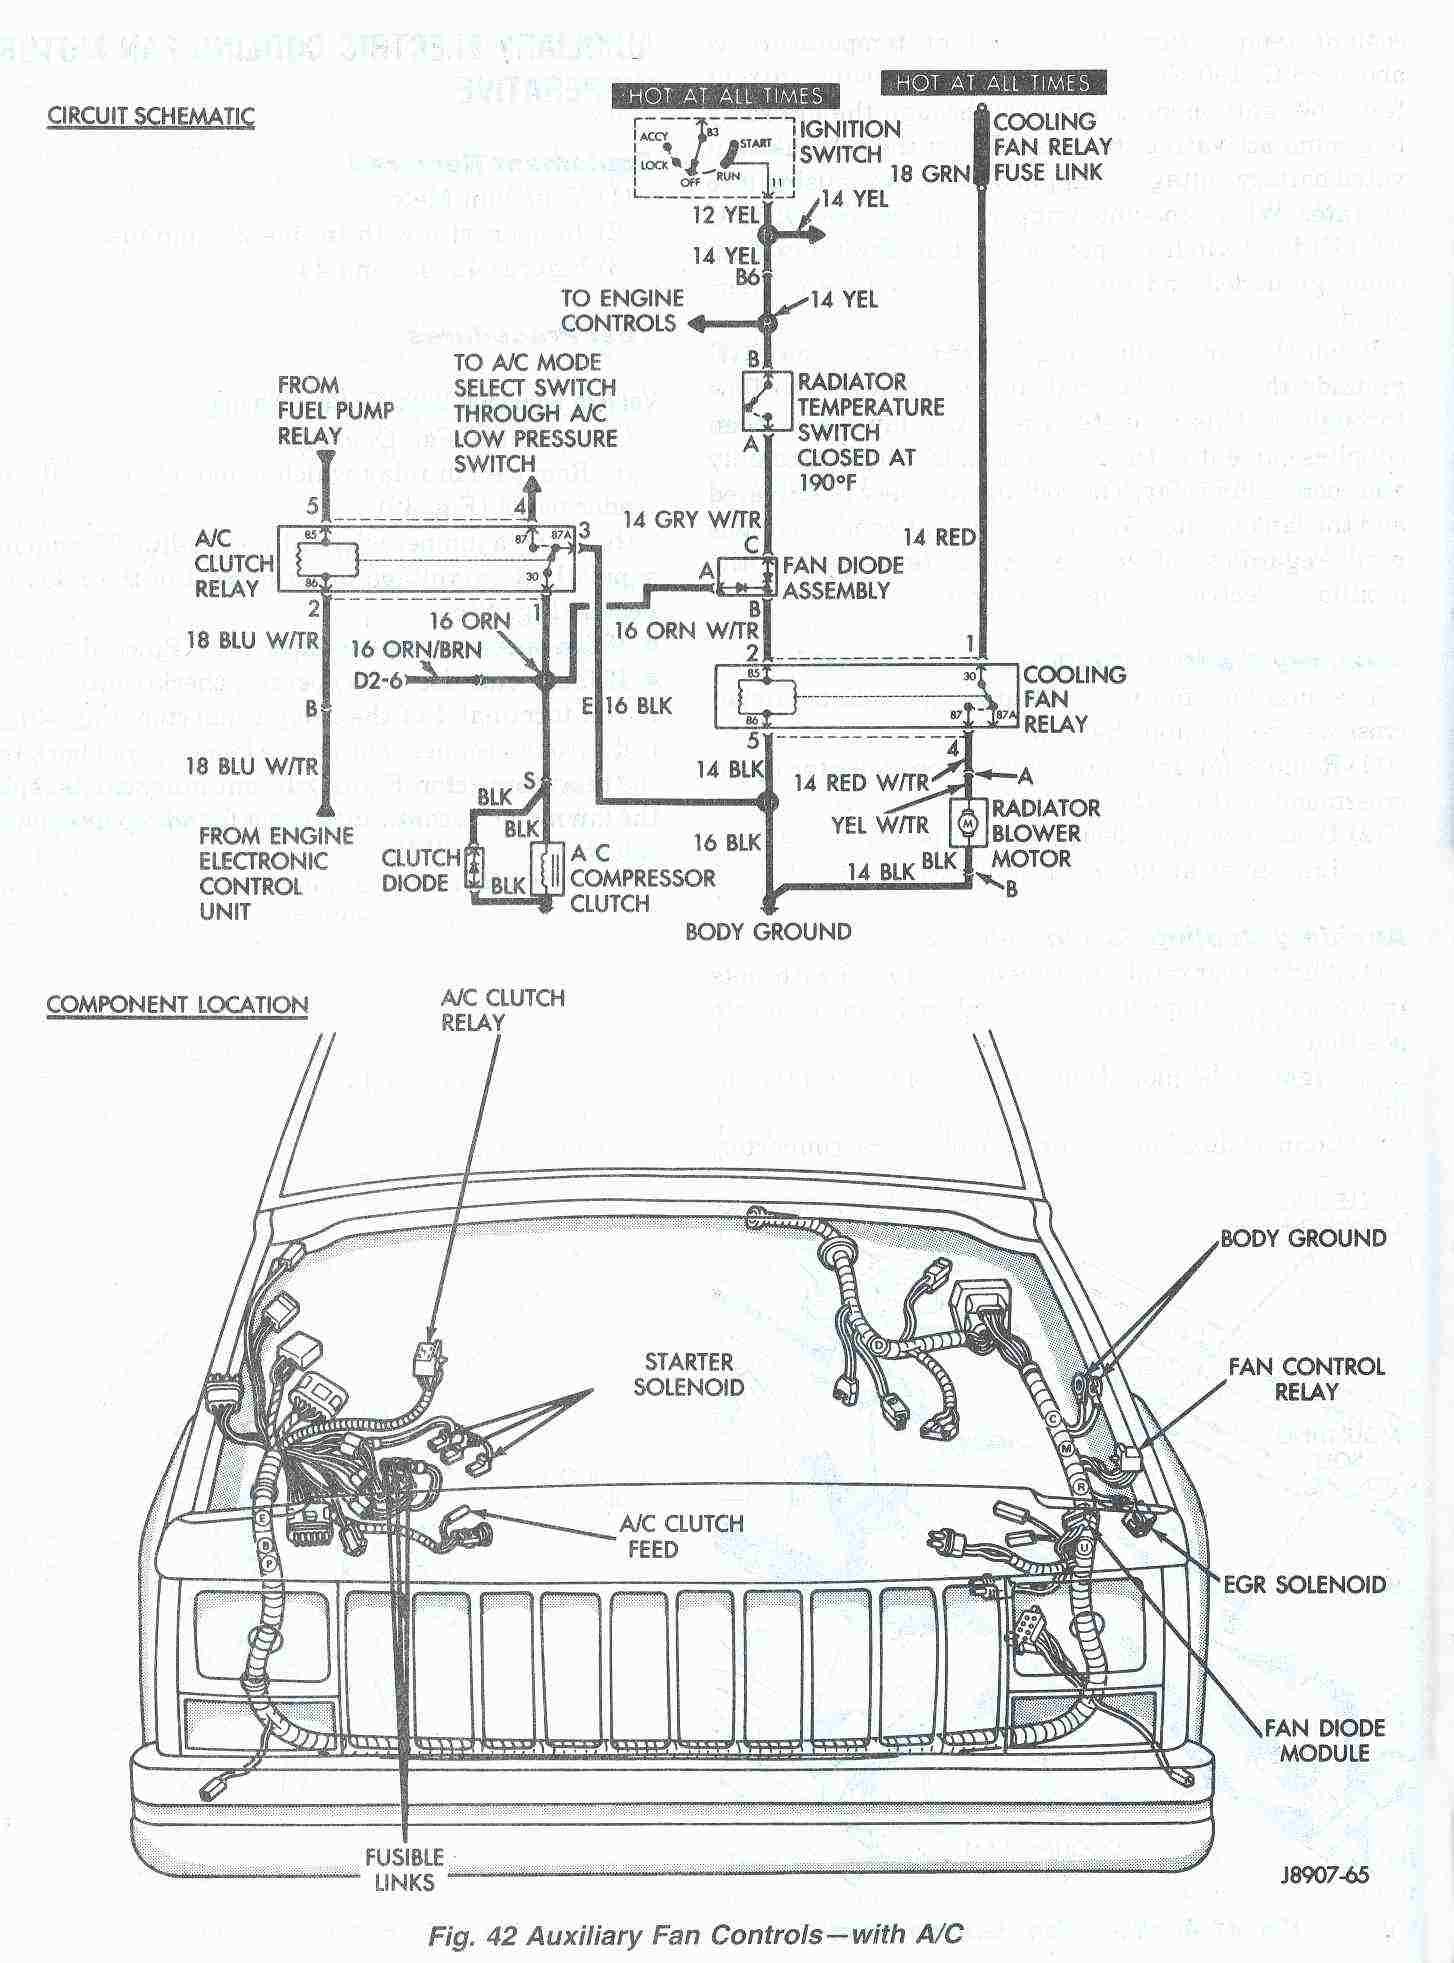 2006 Jeep Grand Cherokee Engine Diagram Wiring Diagram for Ac Unit thermostat Along with Jeep Cherokee Of 2006 Jeep Grand Cherokee Engine Diagram